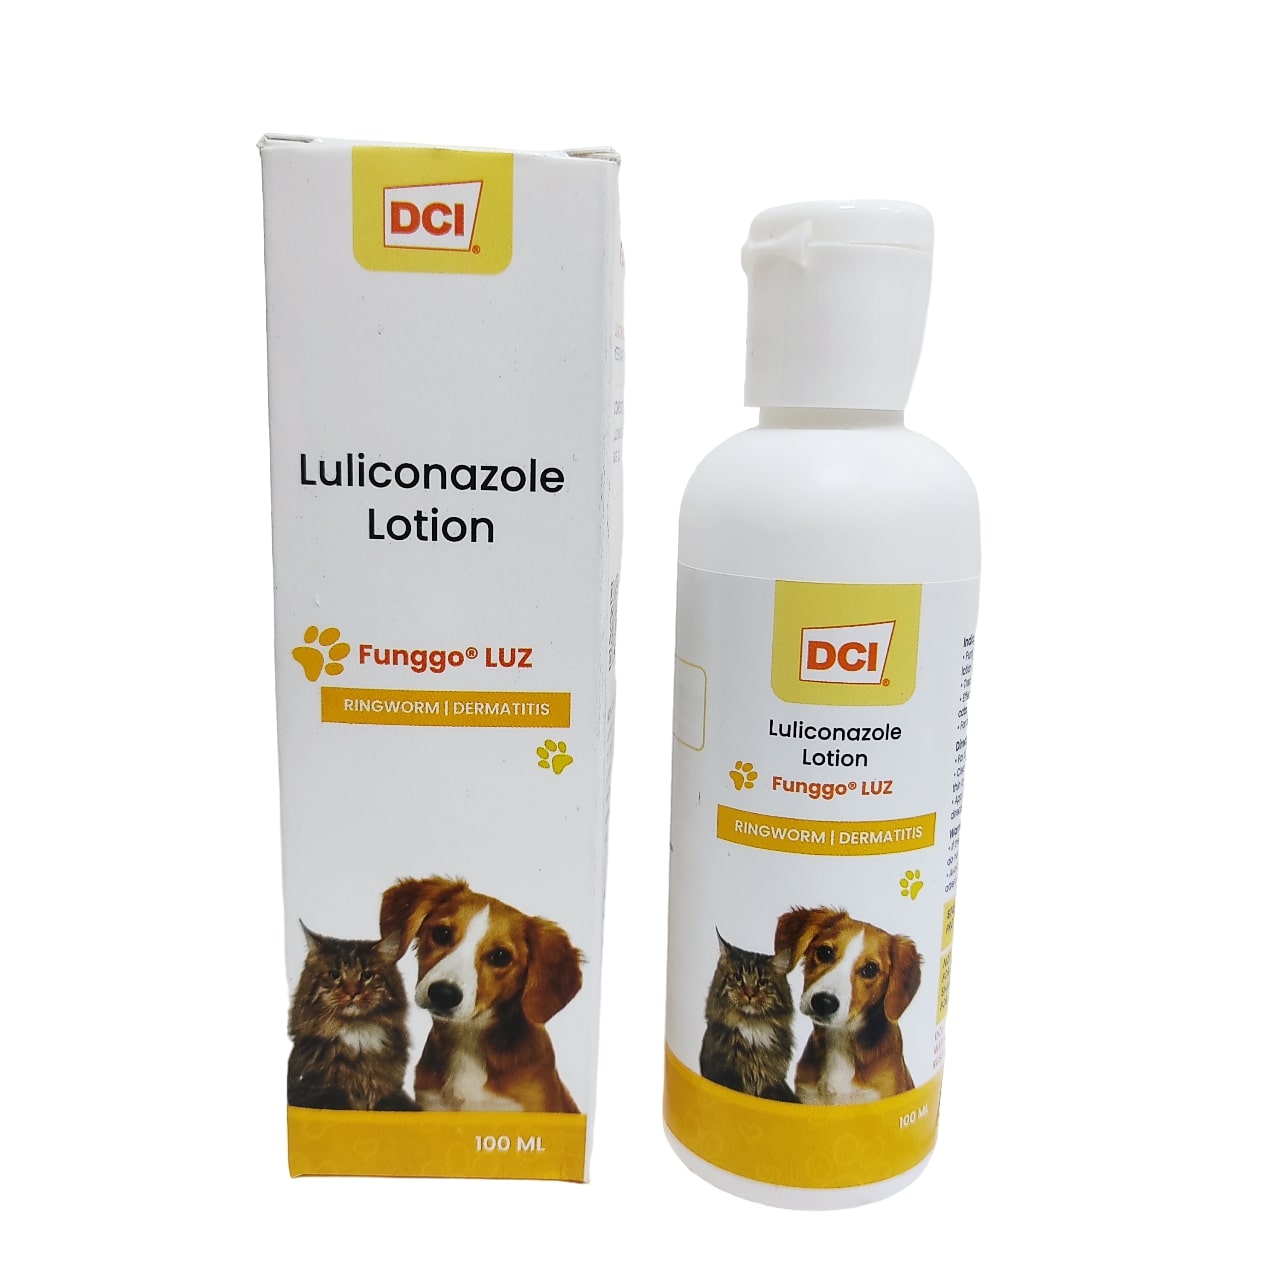 Funggo LUZ, Anti Fungal Lotion for Dogs and Cats, 100 ml, Luliconazole